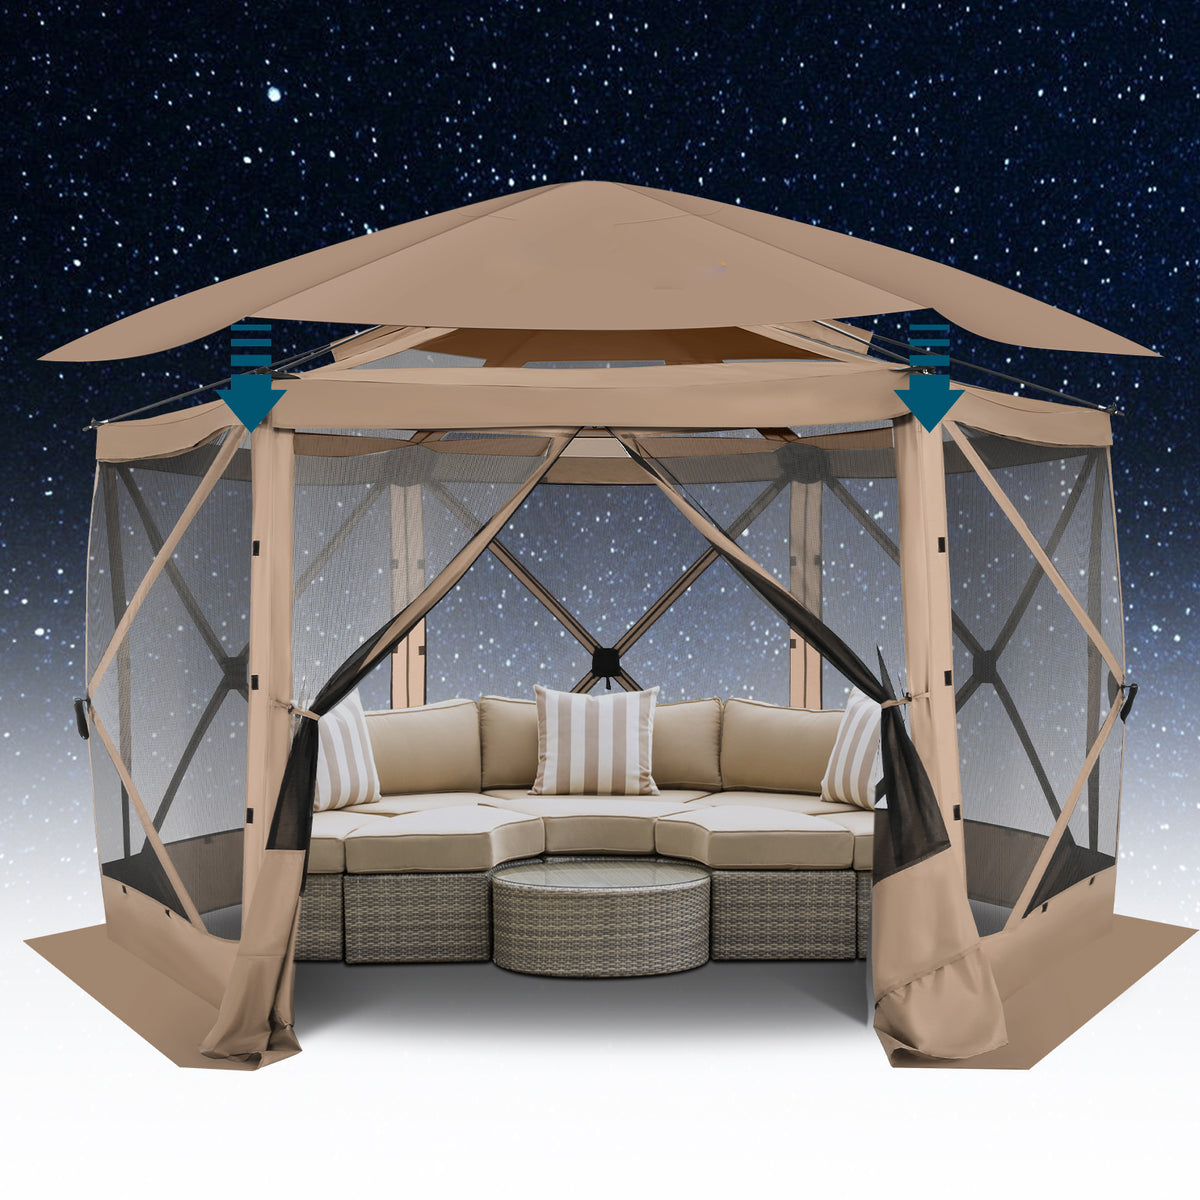 HOTEEL 12' x 12' Portable Pop-Up Outdoor Camping Gazebo, Screen Room with Mosquito Nettings, Waterproof, UV, Hub Tent Instant Screened Tent Canopy Shelter with Ground Stakes & Carry Bag, Beige